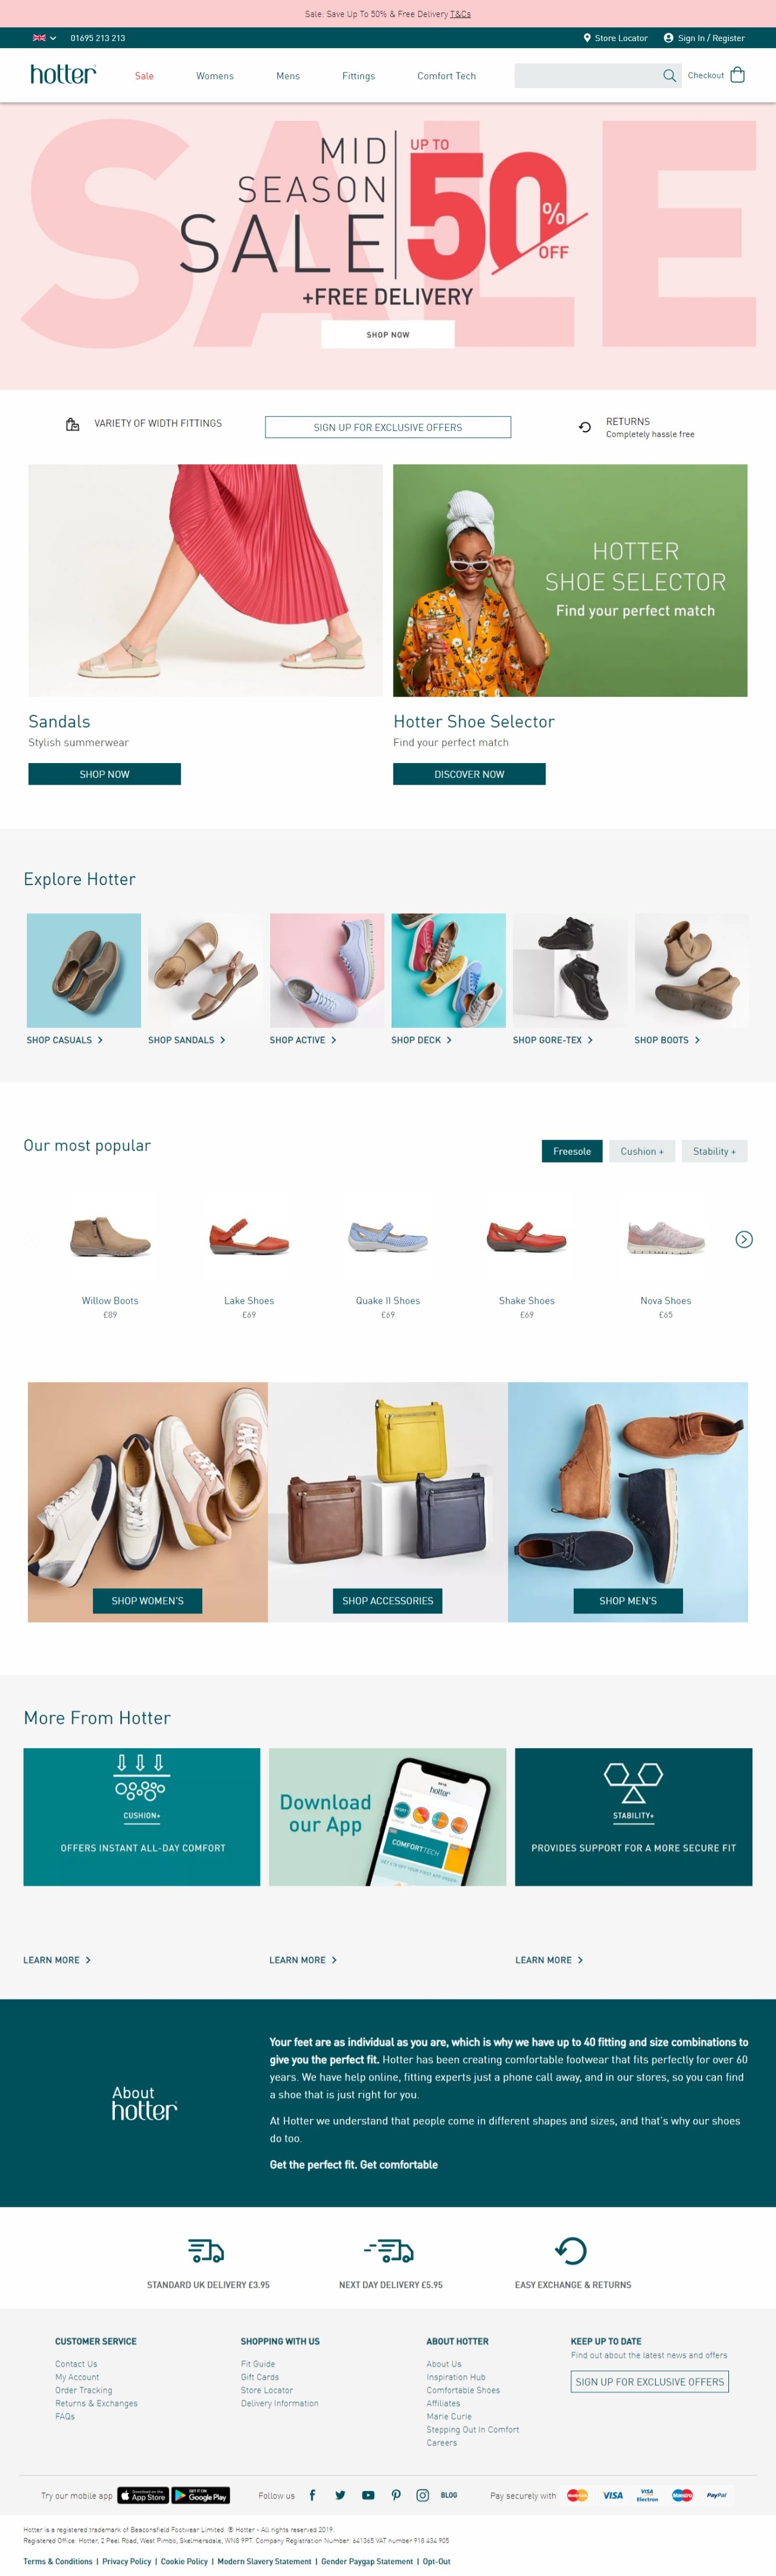 Hotter The UKs Largest Shoe Retailer - Scroll to View